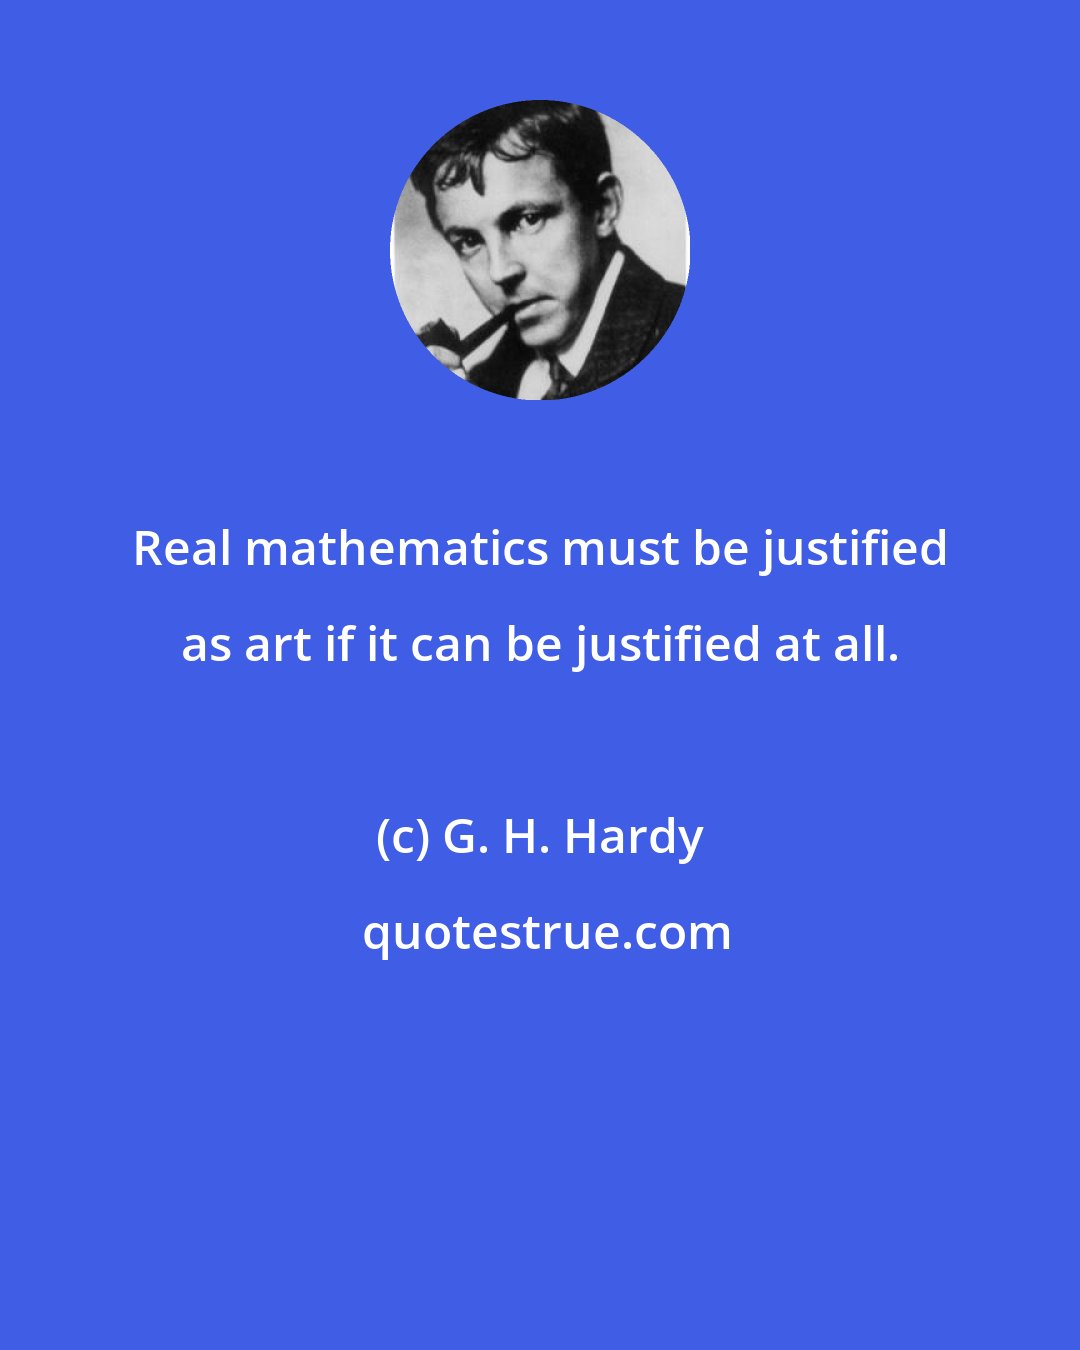 G. H. Hardy: Real mathematics must be justified as art if it can be justified at all.